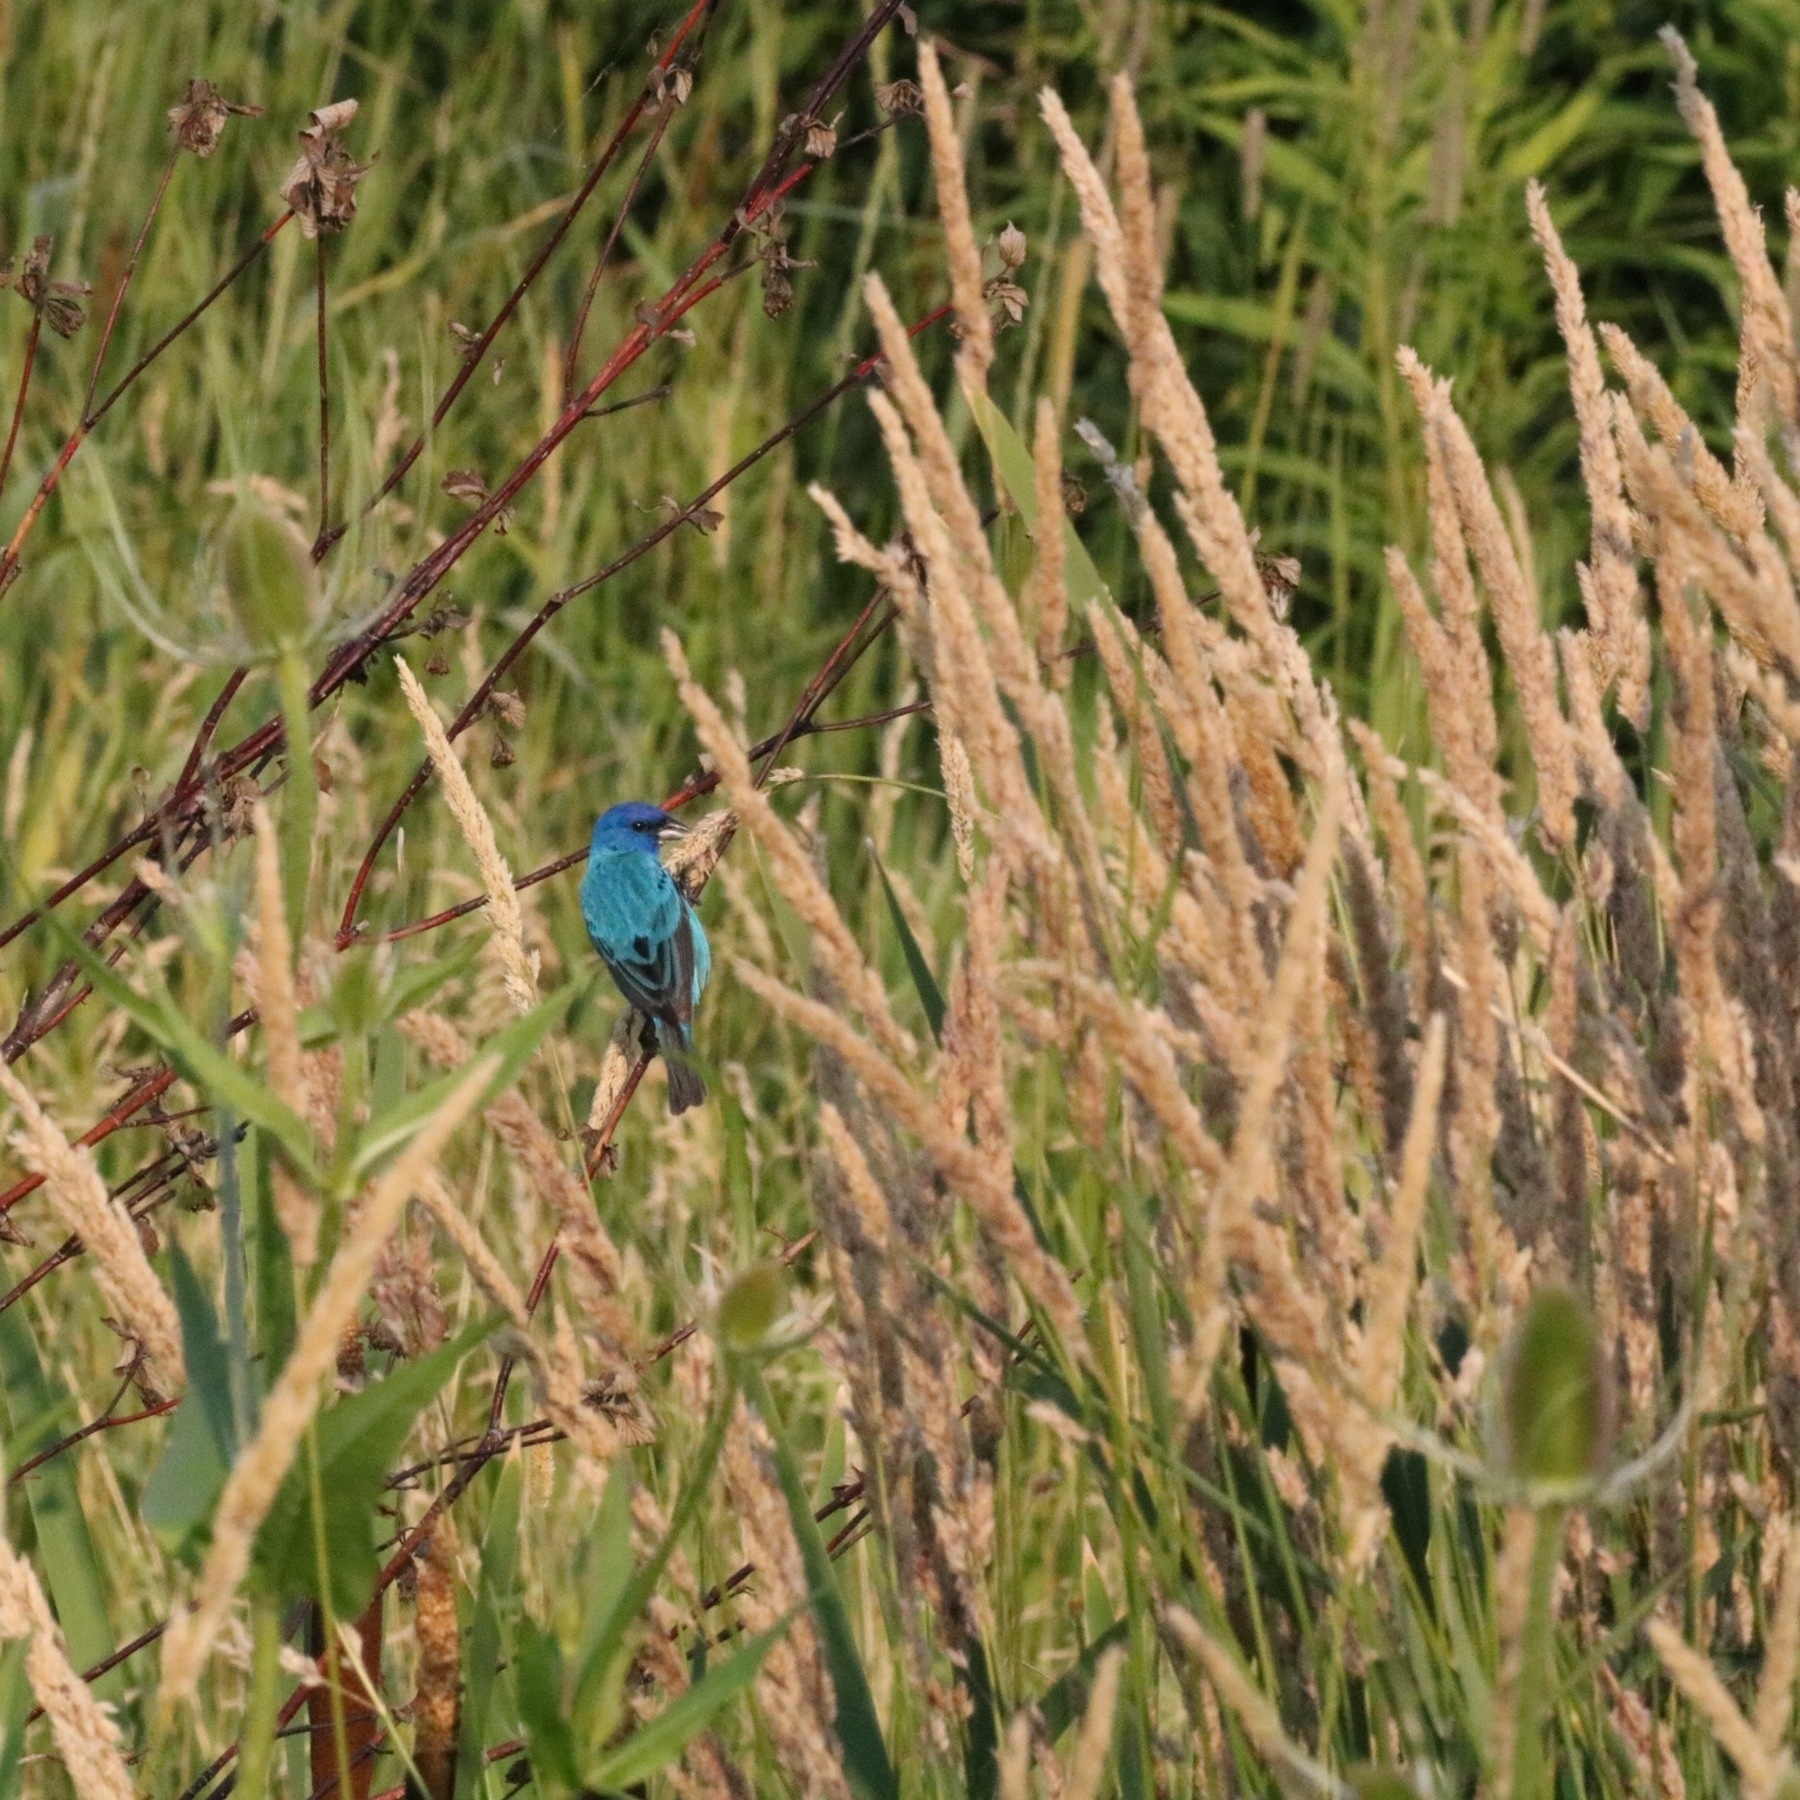 a blue indigo bunting sitting amid tall grass. there are red dogwood branches visible too